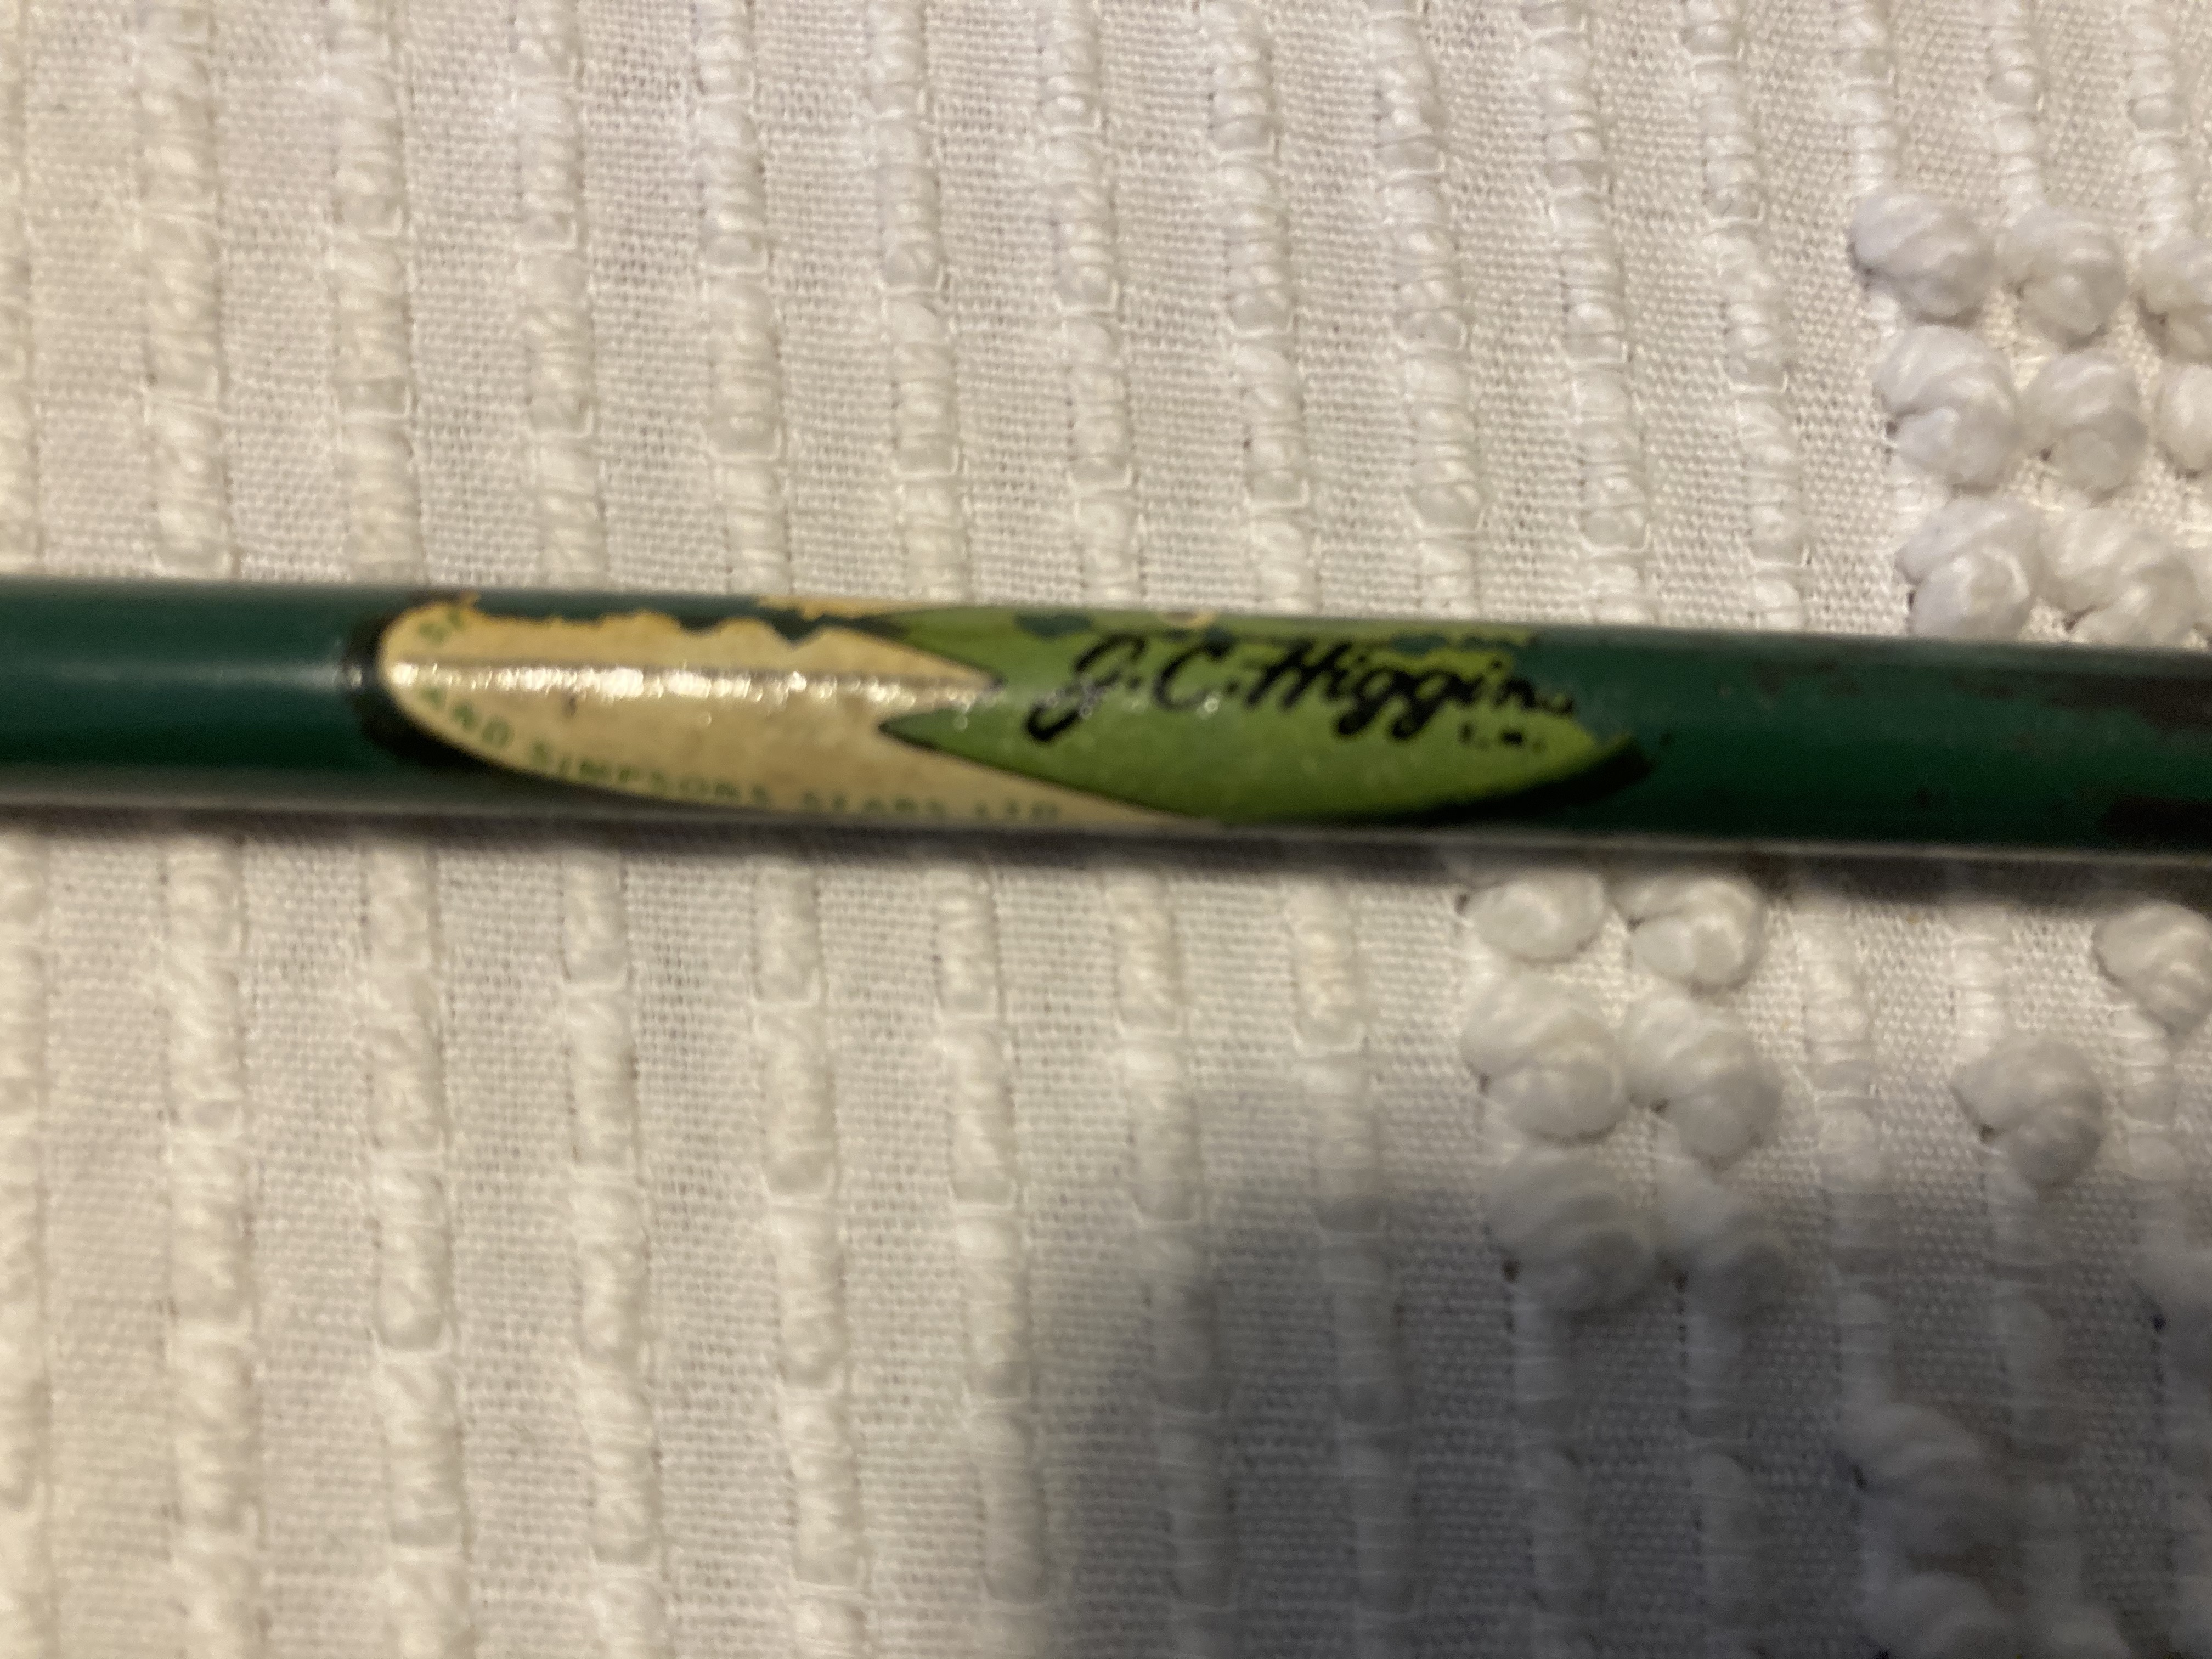 Extremely Rare Metal Telescopic Fly Rod-J.C.